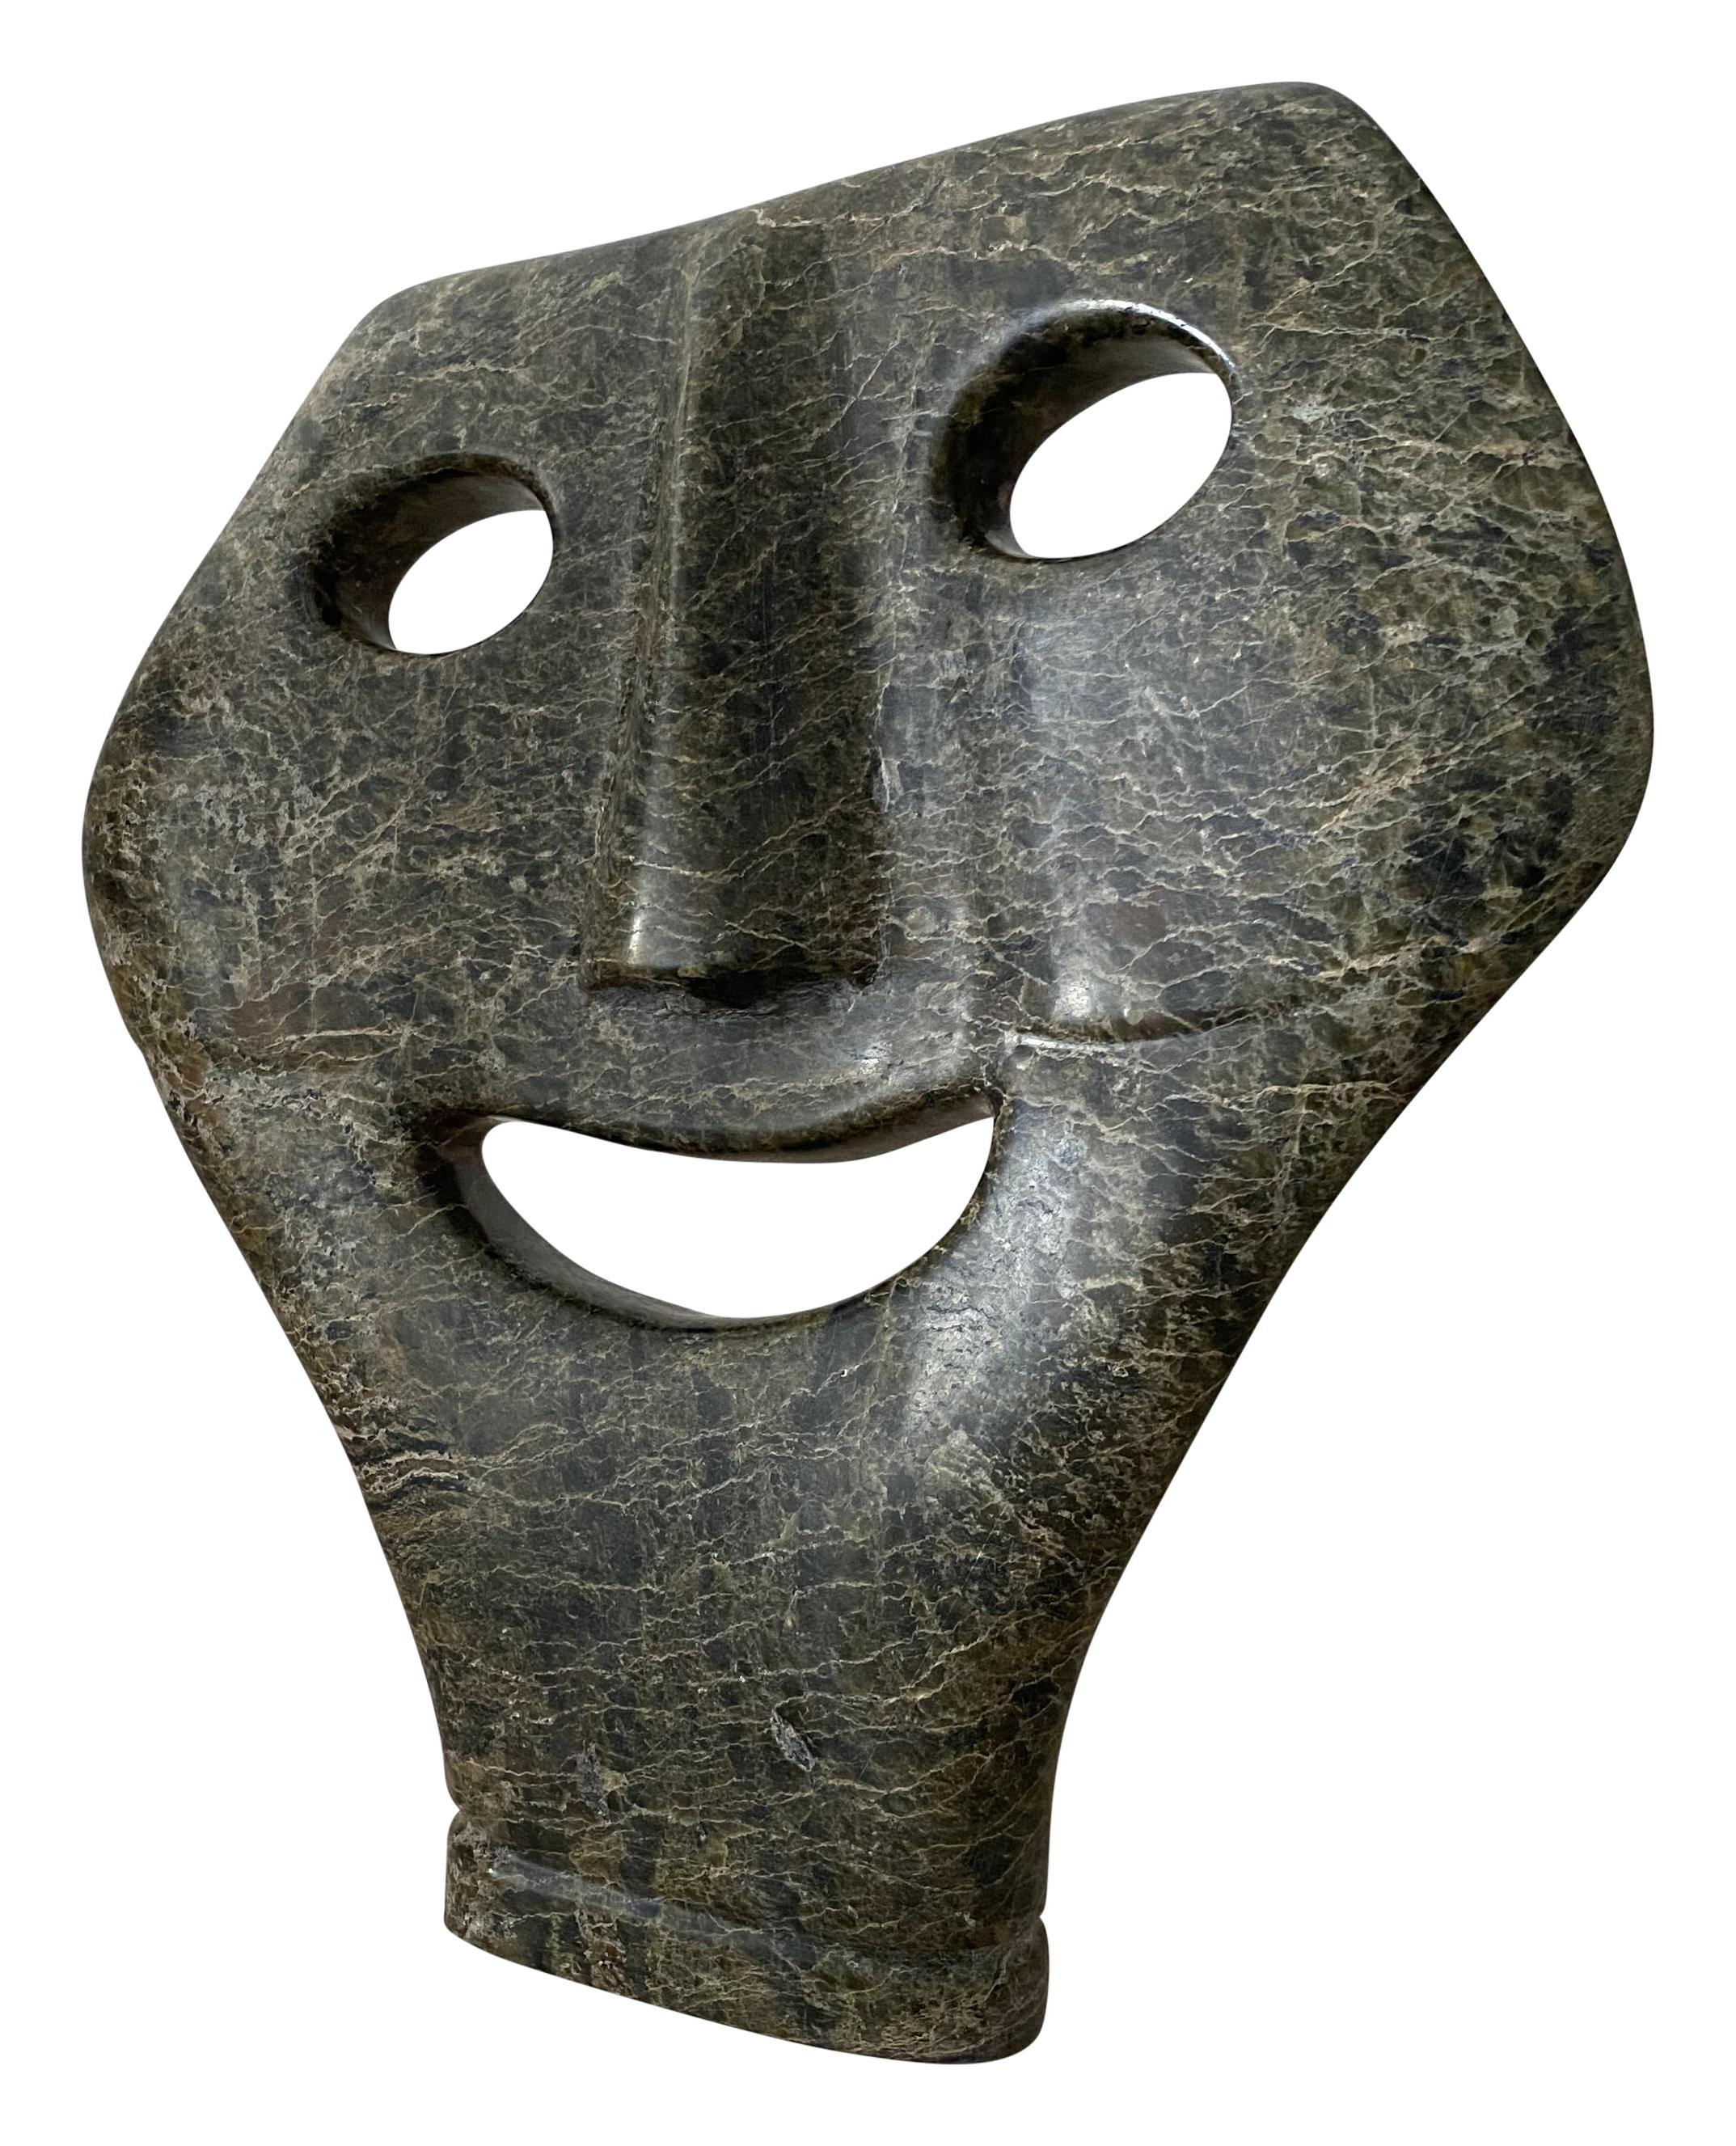 Intuit Carved Greenstone Mask Figurative Sculpture In Good Condition For Sale In West Palm Beach, FL